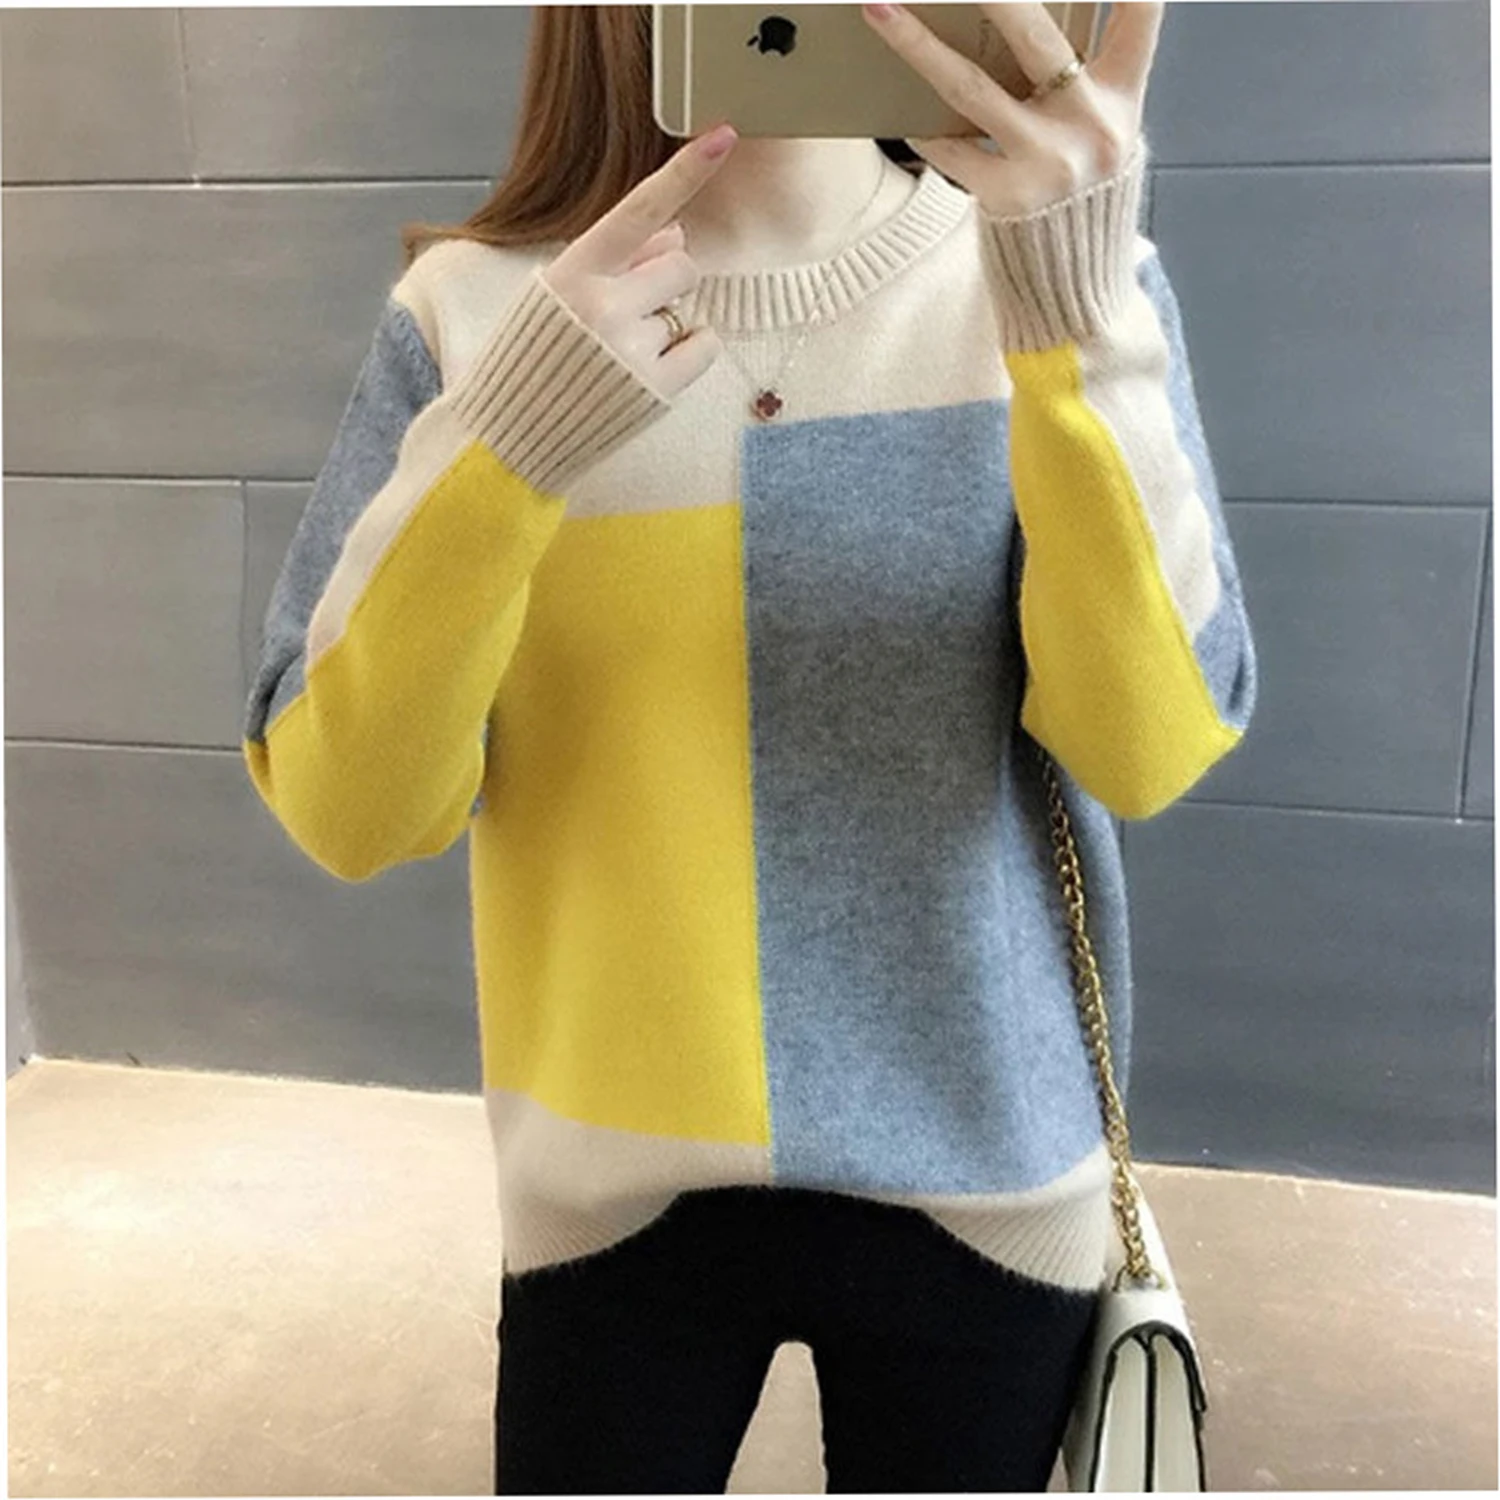 

Chunky Knit Sweater Pull Enfant Red And Black Striped Sweater Raglan Sleeve T Shirt Women Jersey Mujer 2021 Autumn Winter Women